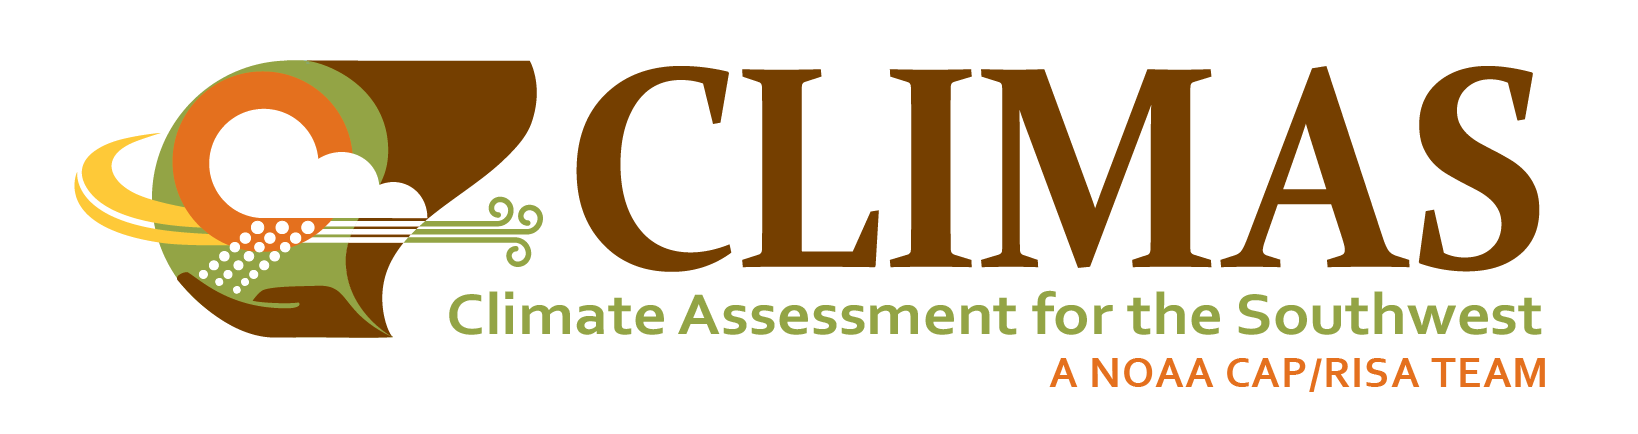 literature review on climate change adaptation